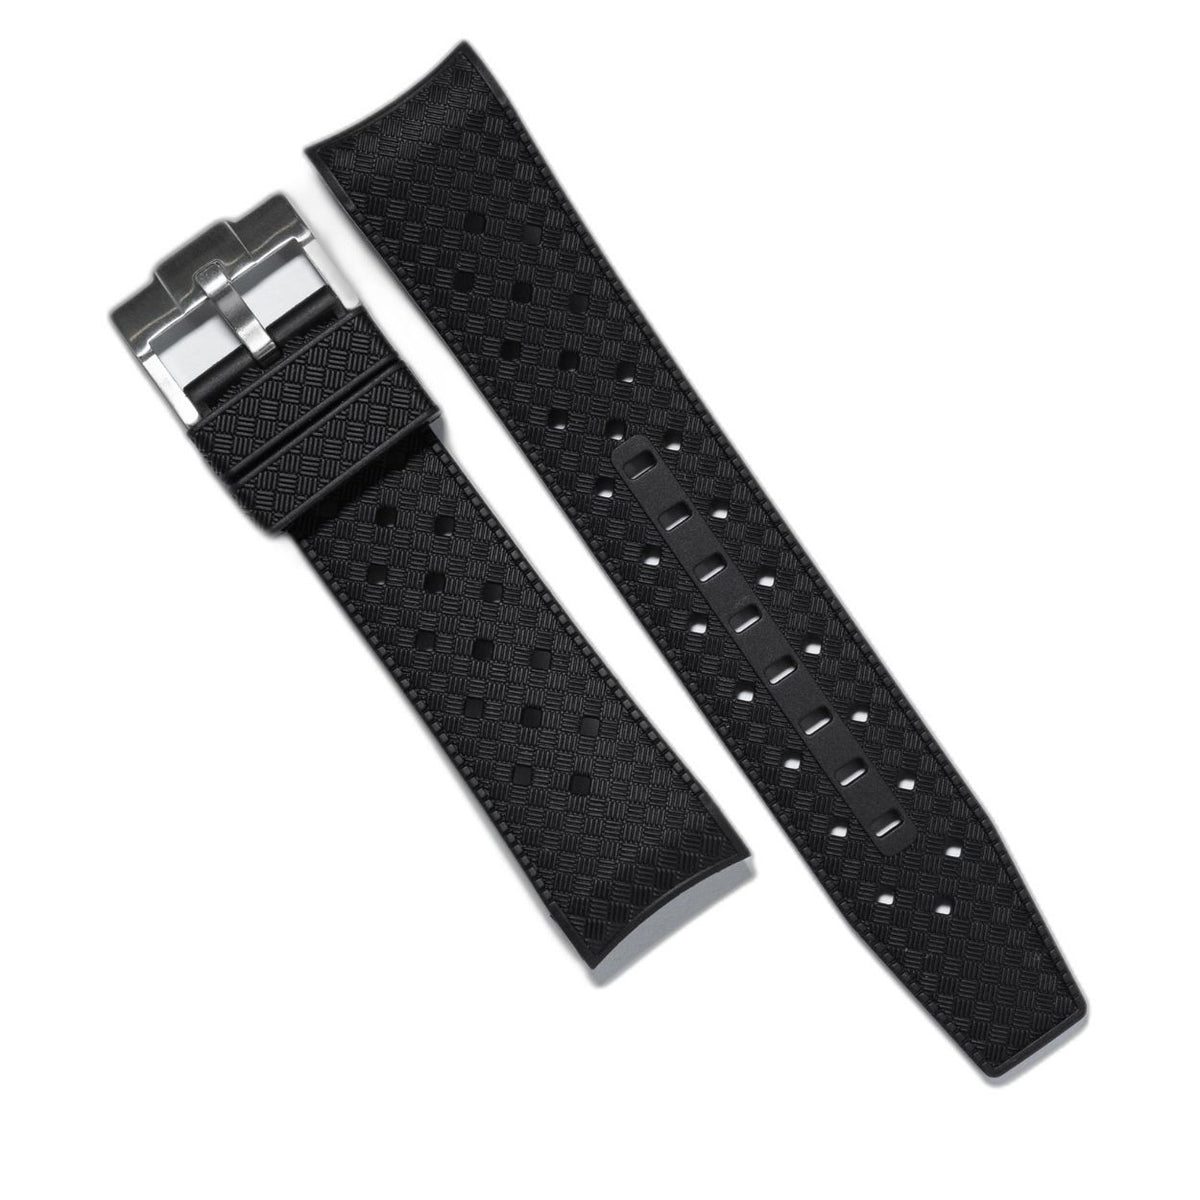 Tropic Curved End Rubber Strap for Blancpain x Swatch Scuba Fifty Fathoms in Black - Nomad Watch Works SG